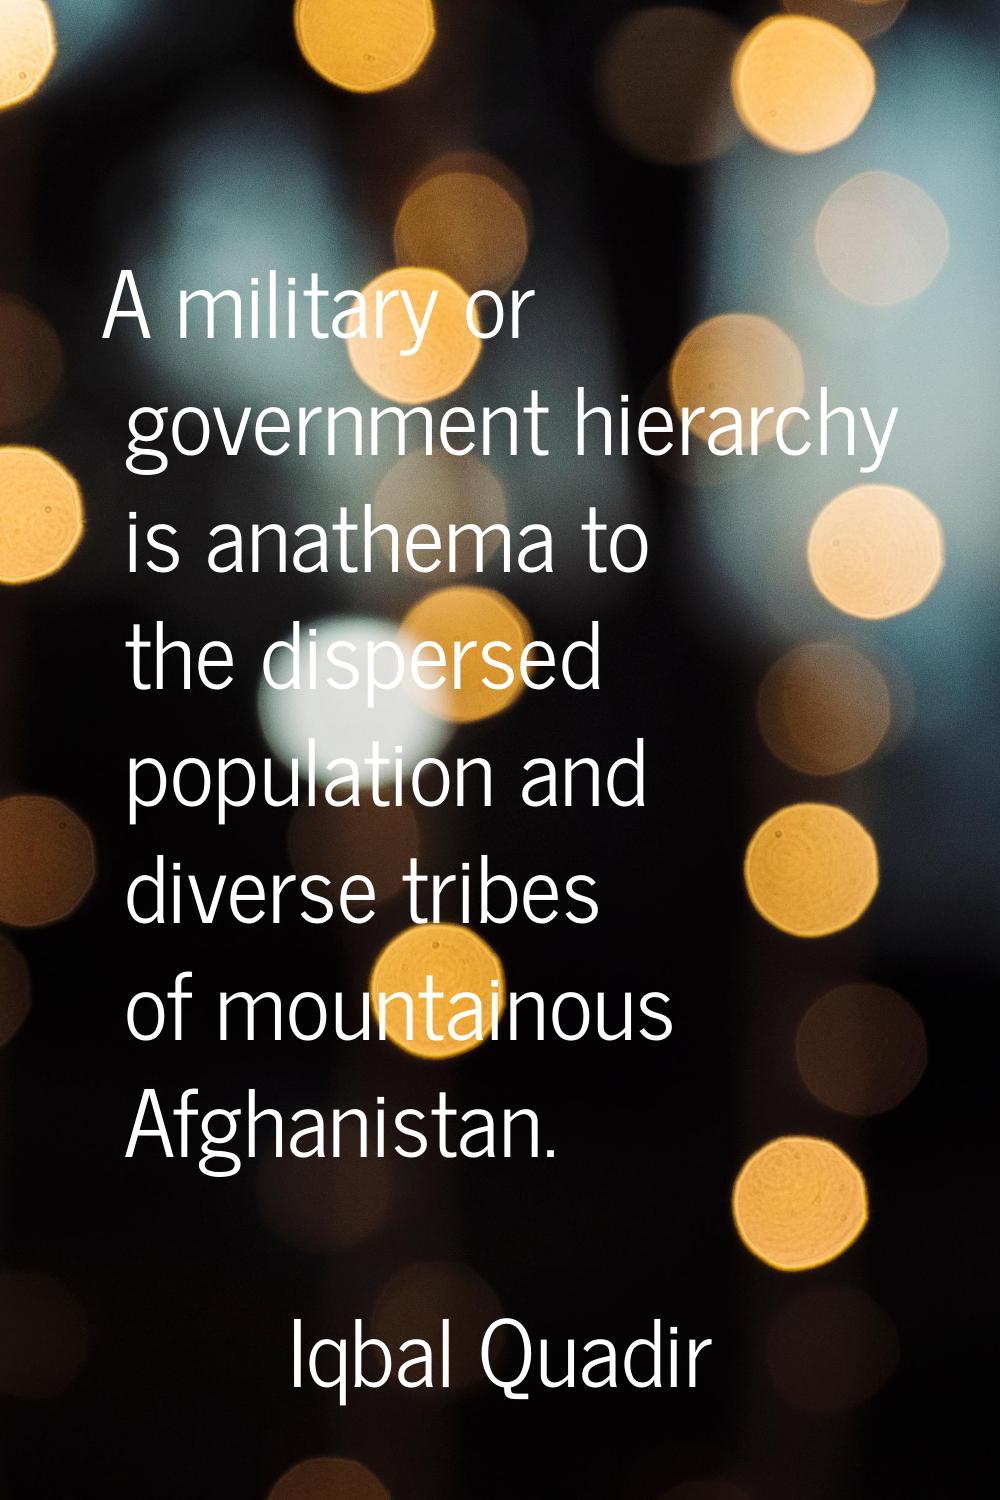 A military or government hierarchy is anathema to the dispersed population and diverse tribes of mo